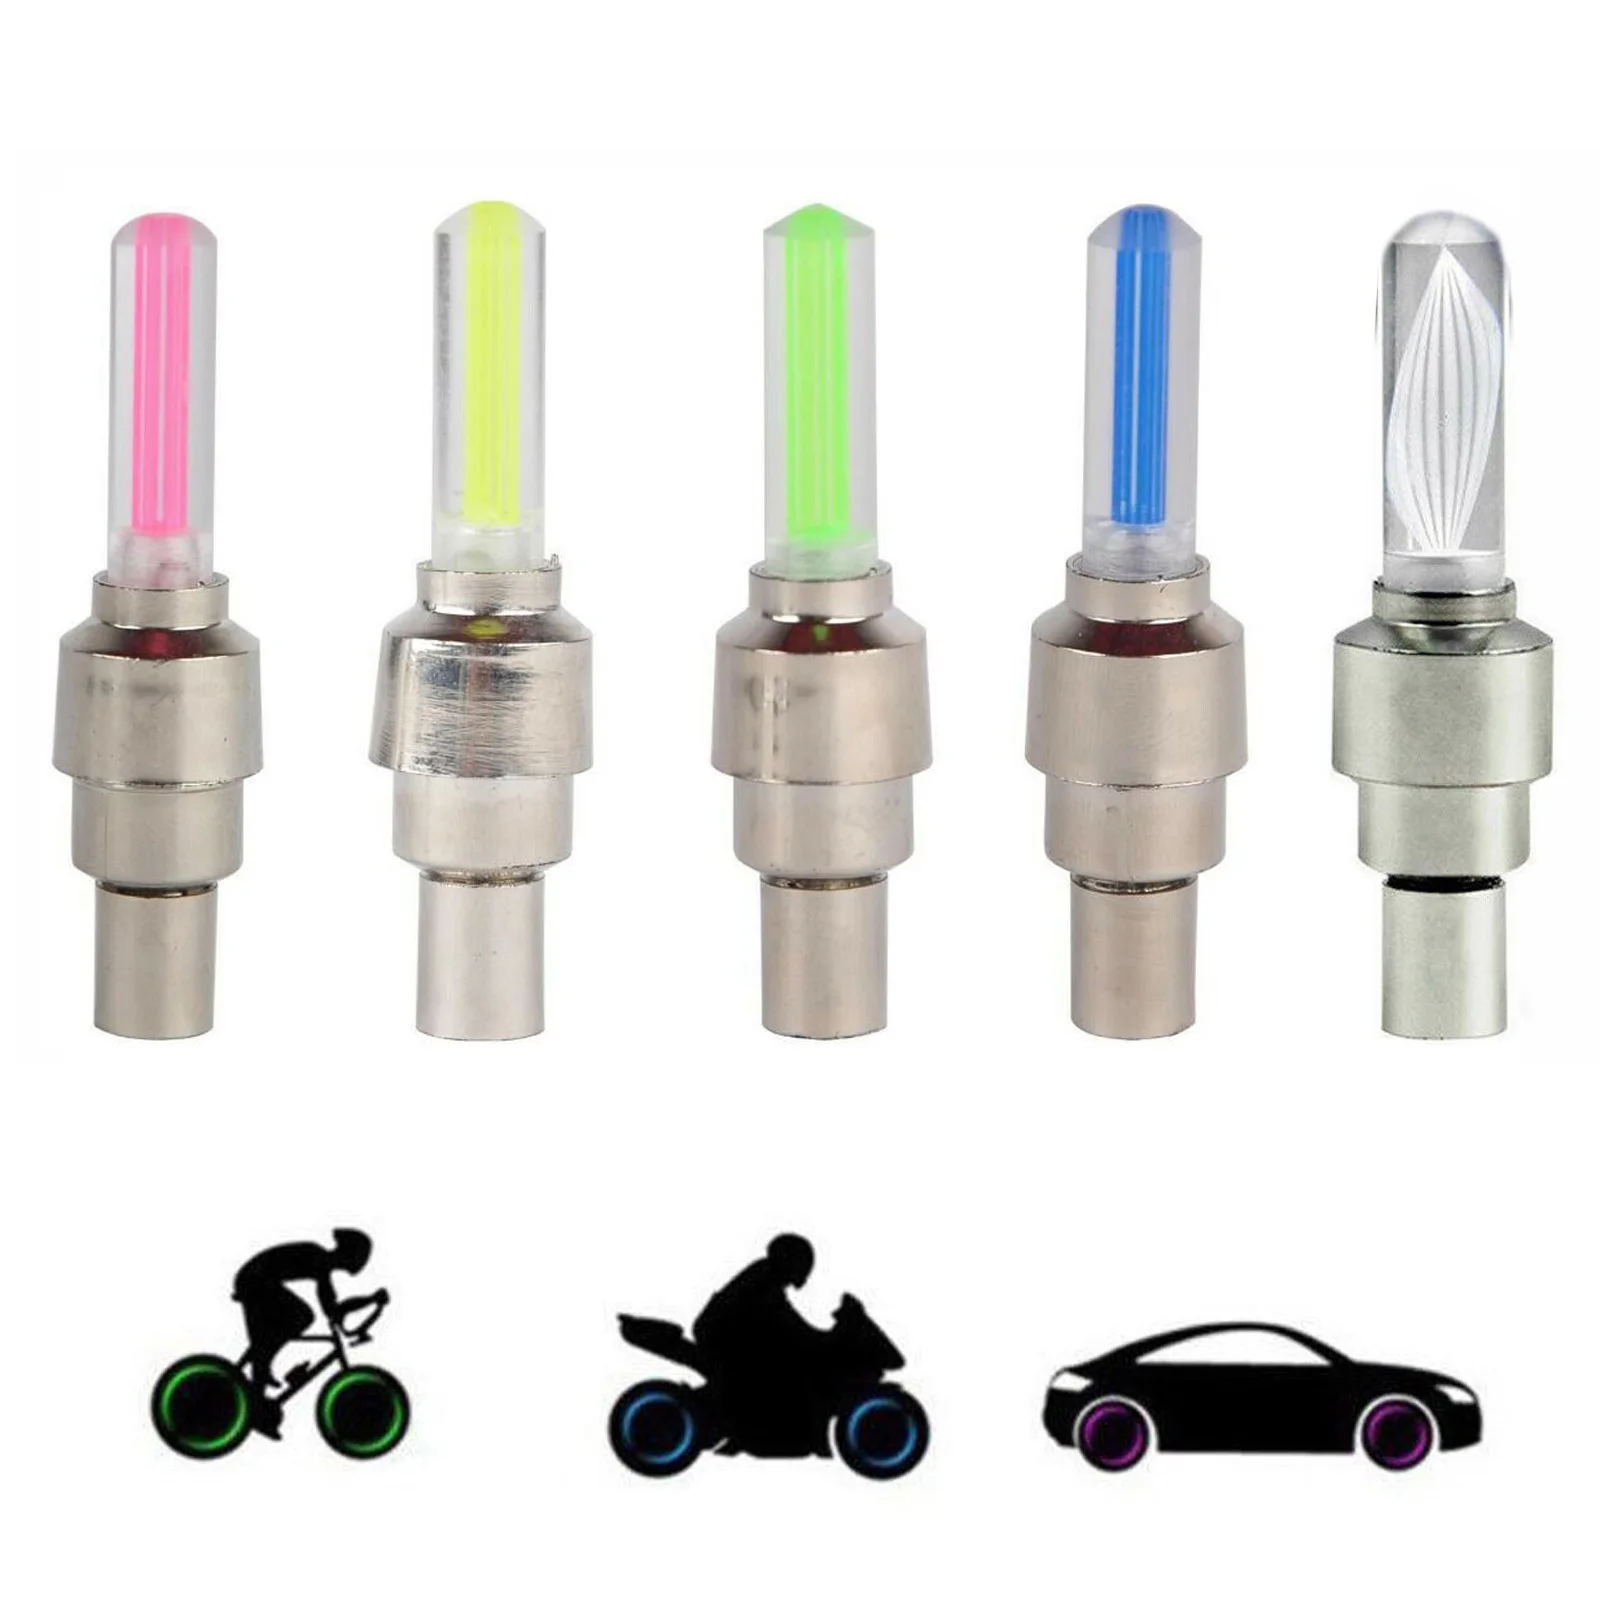 

DROPSHIPPING Flashing Bike Tyre Valve Lights Waterproof LED Wheel Light For Car Bicycle Motorcycle, Yellow.green.pink.blue,multicolor